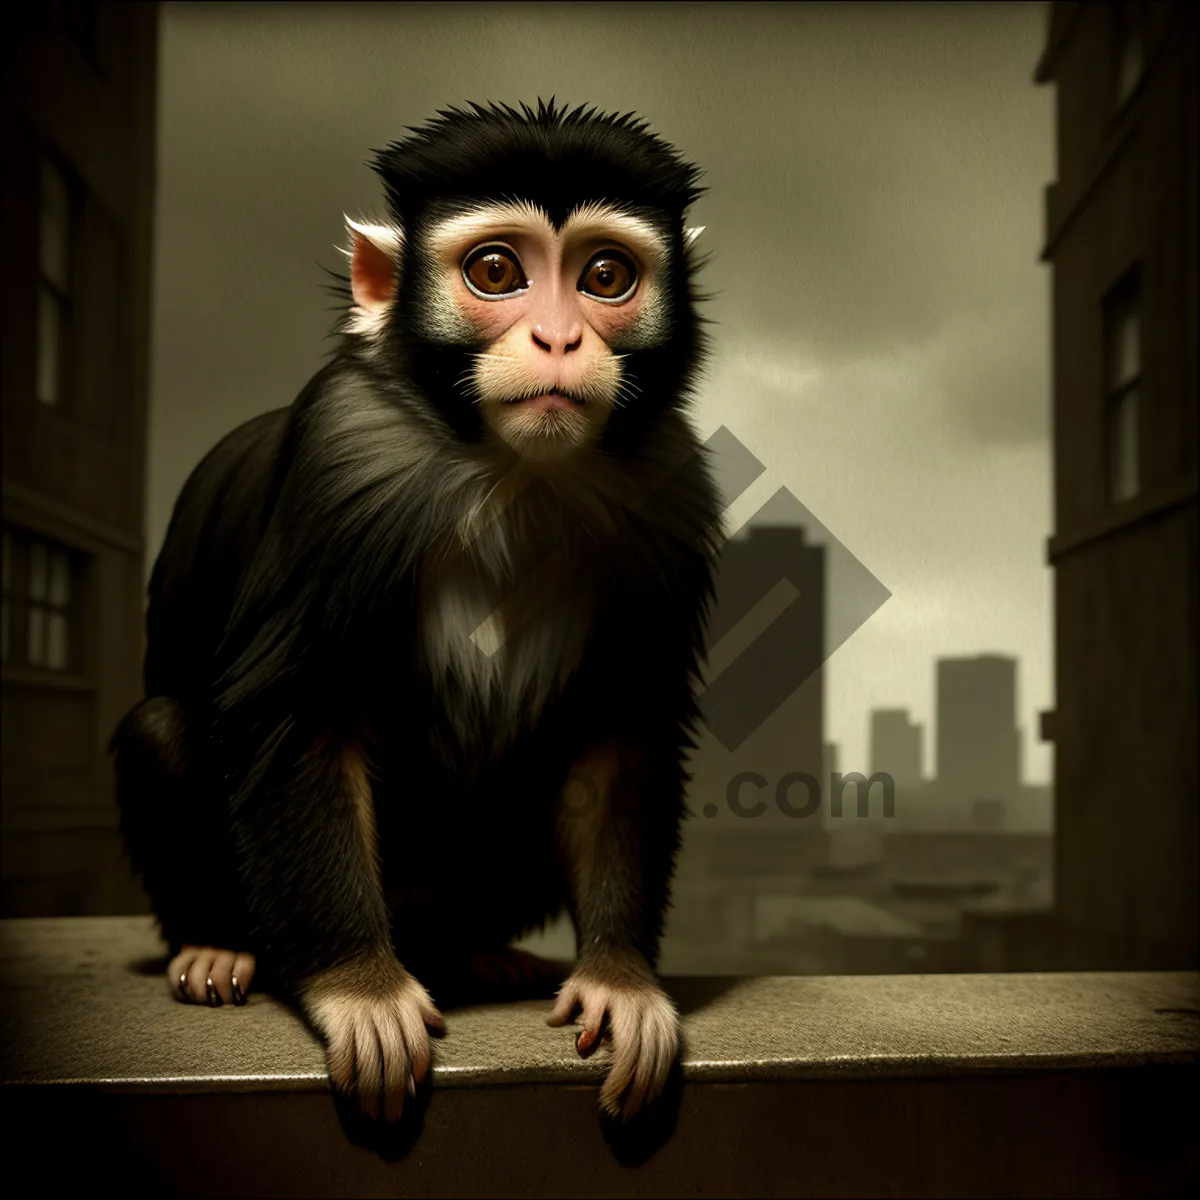 Picture of Playful Macaque Monkey Portrait at the Zoo